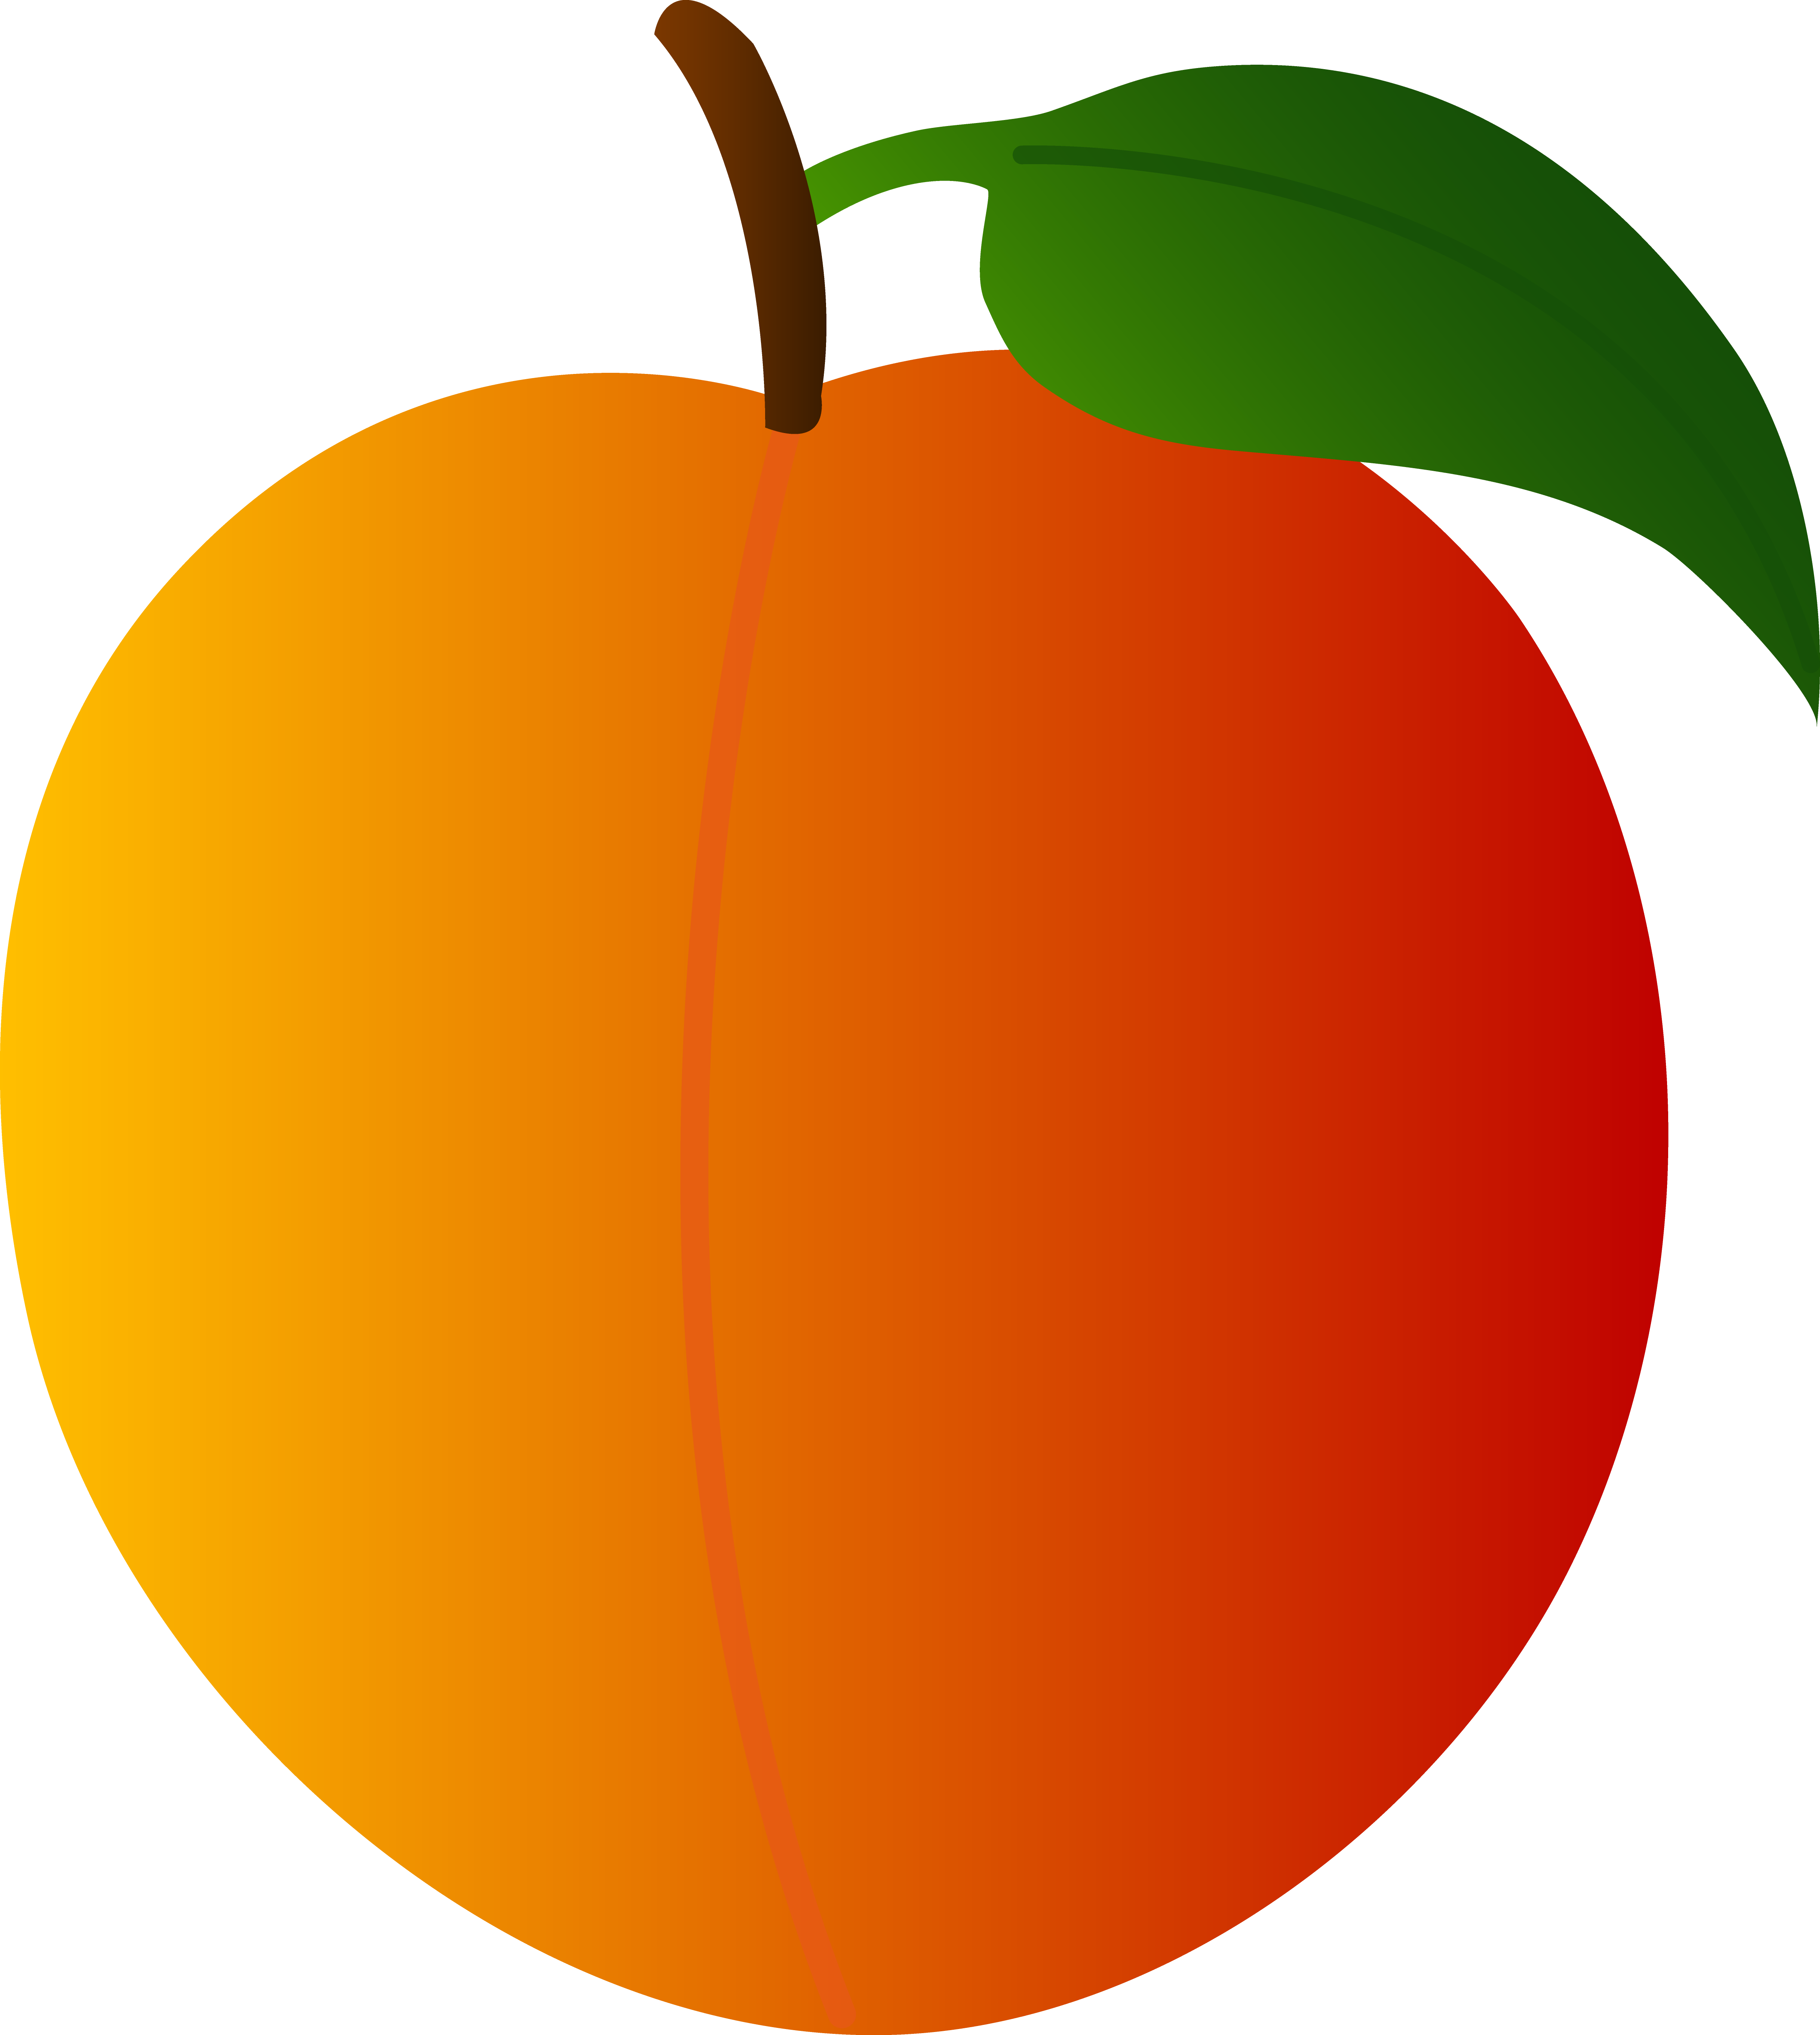 fruits clipart images - photo #25